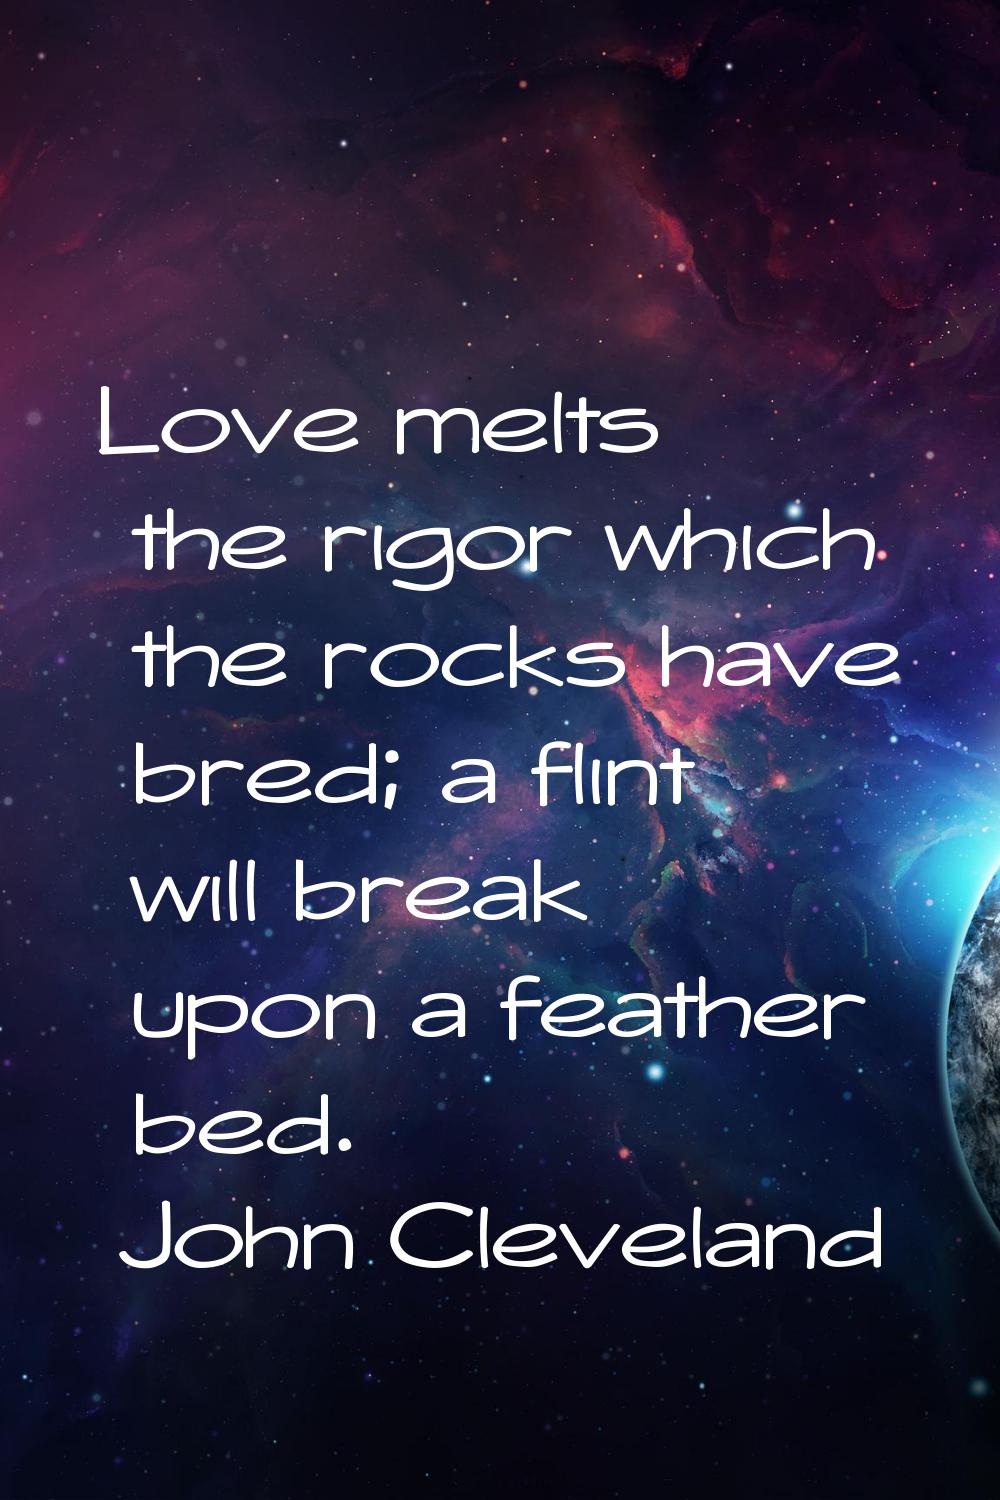 Love melts the rigor which the rocks have bred; a flint will break upon a feather bed.